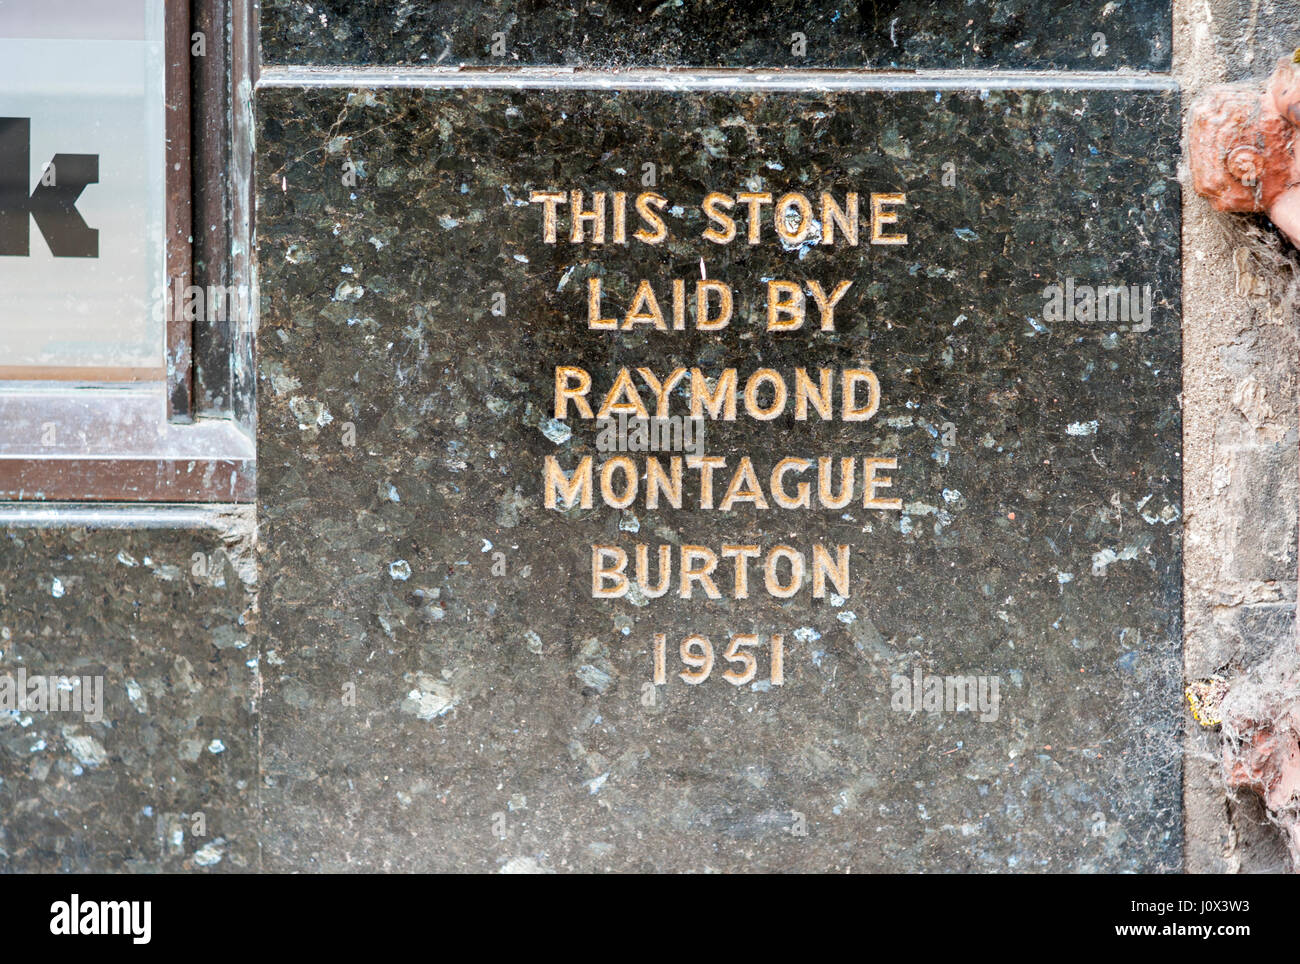 Motague Burton shop signs and foundation stones harking back to the era when the Burton shops were the height of mass market men's fashion Stock Photo